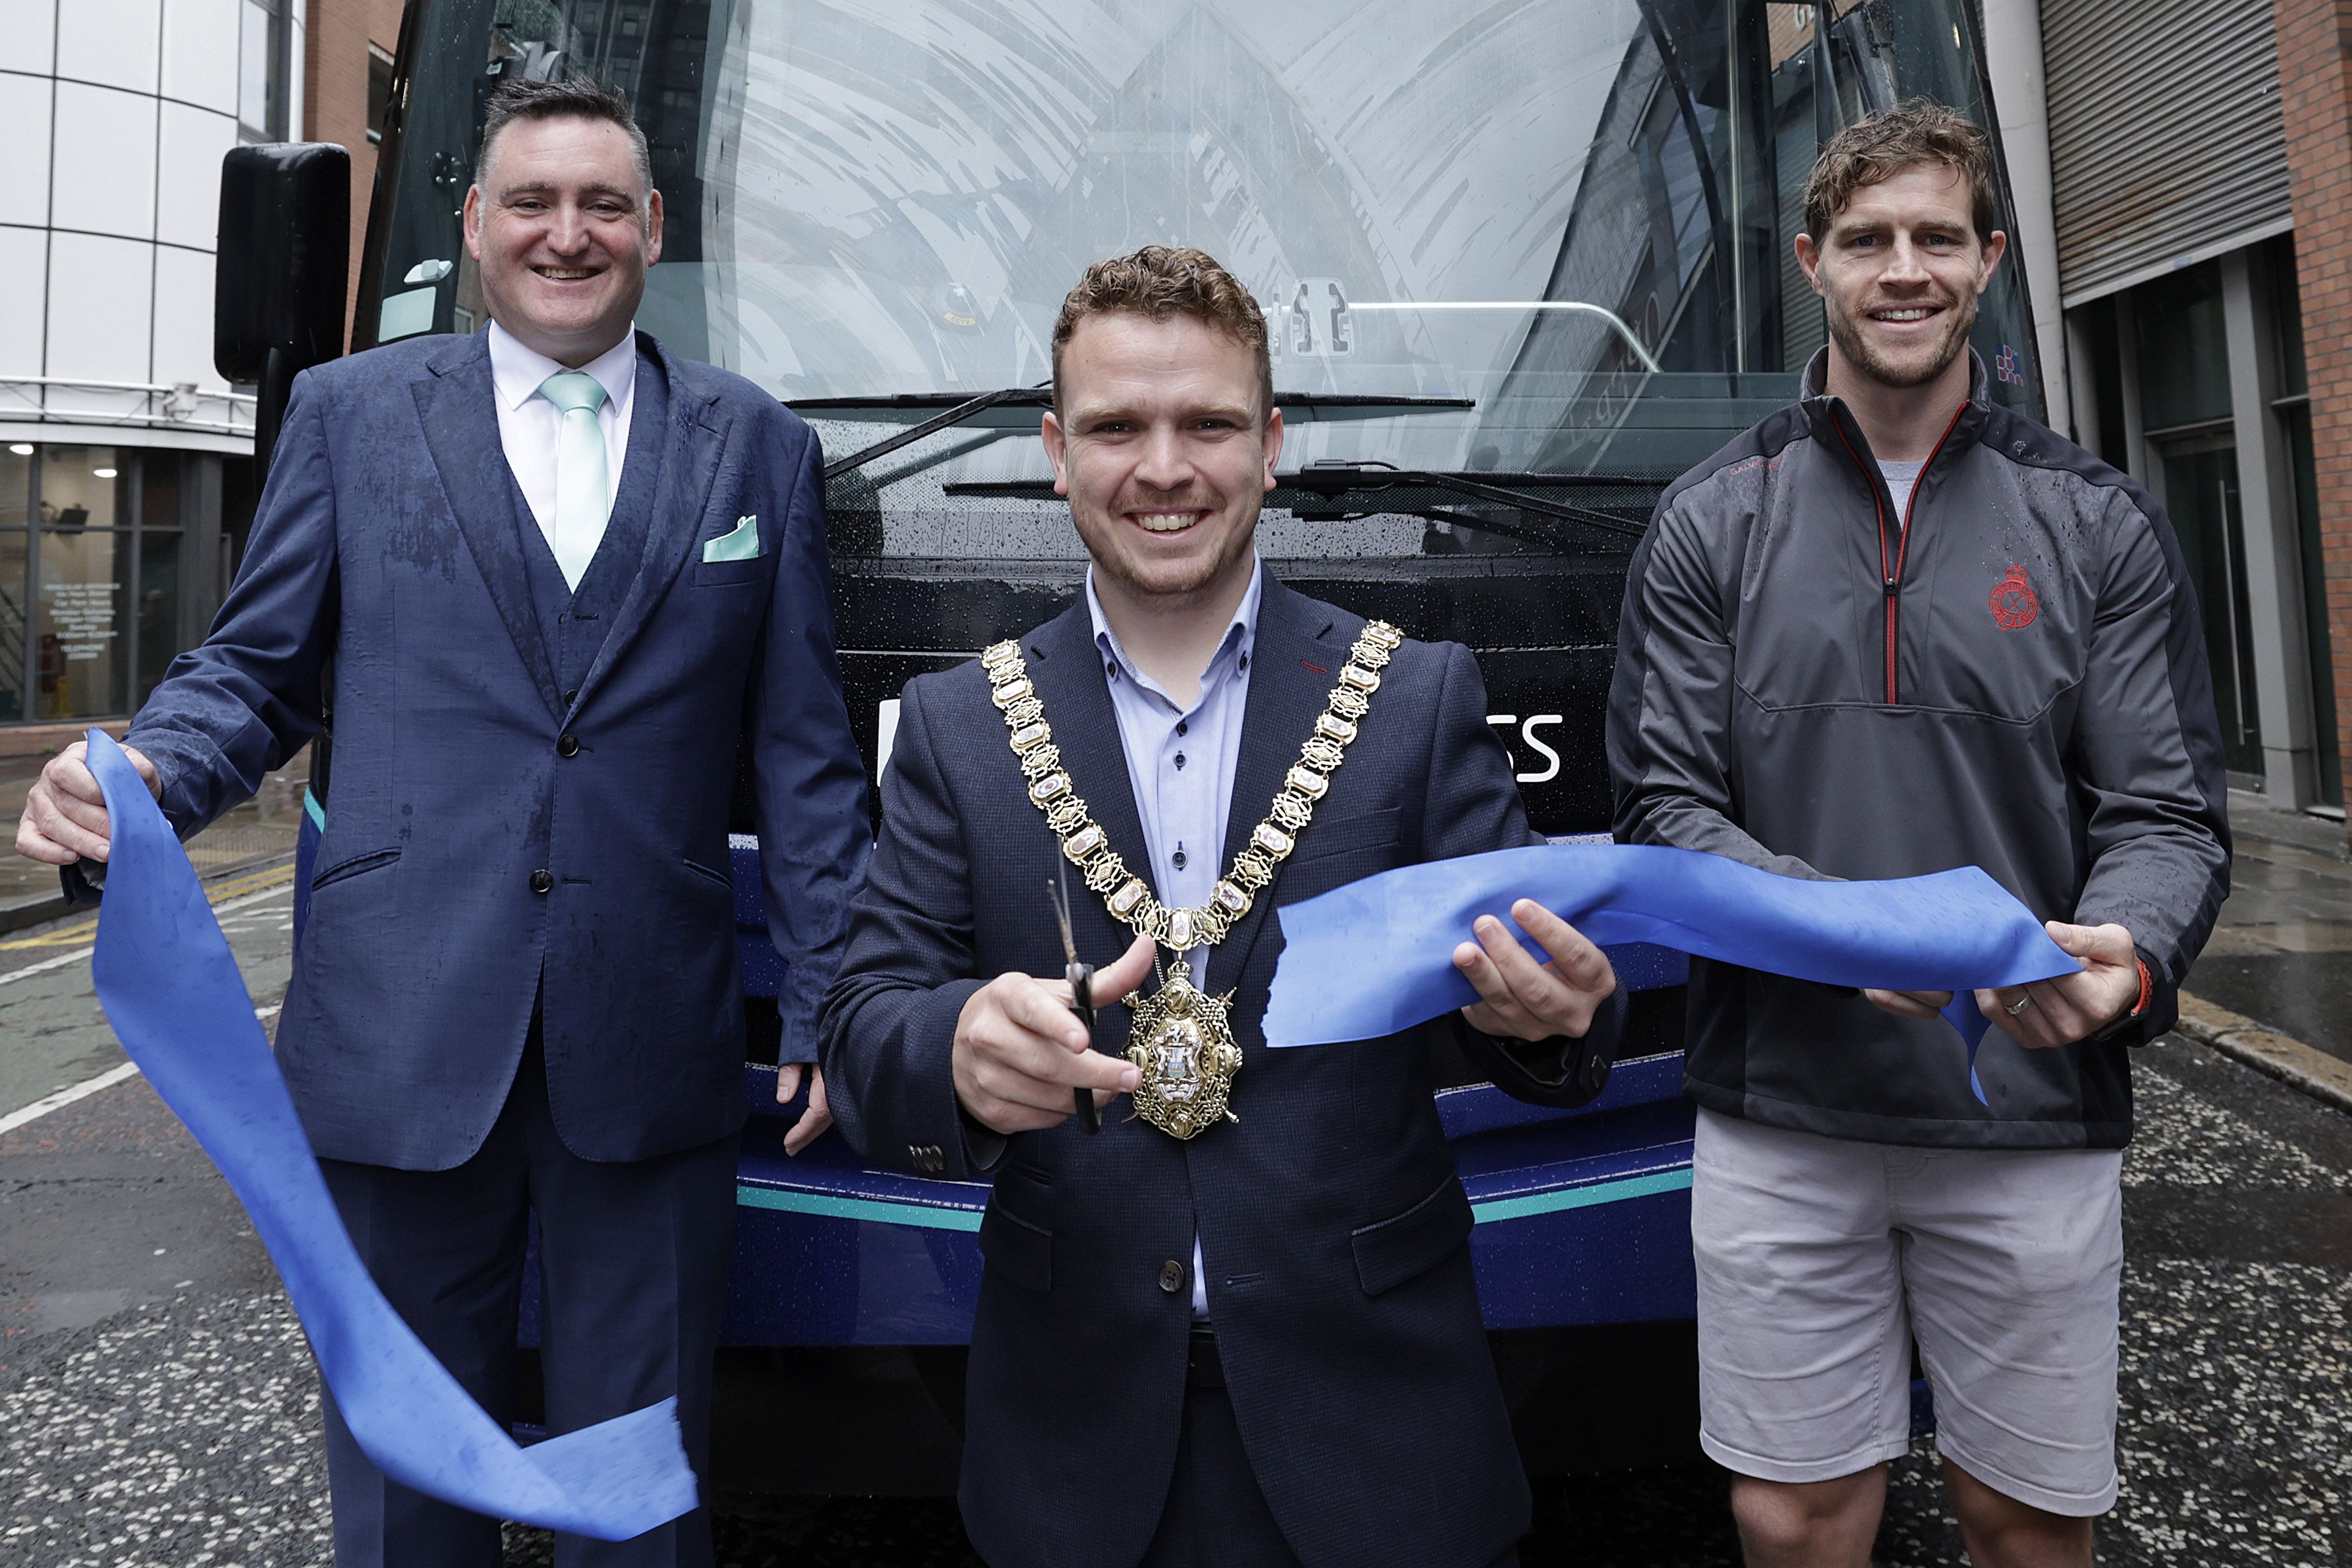 AT YOUR SERVICE: Lord Mayor Ryan Murphy launched the new service with Ulster and Ireland rugby star Andrew Trimble 